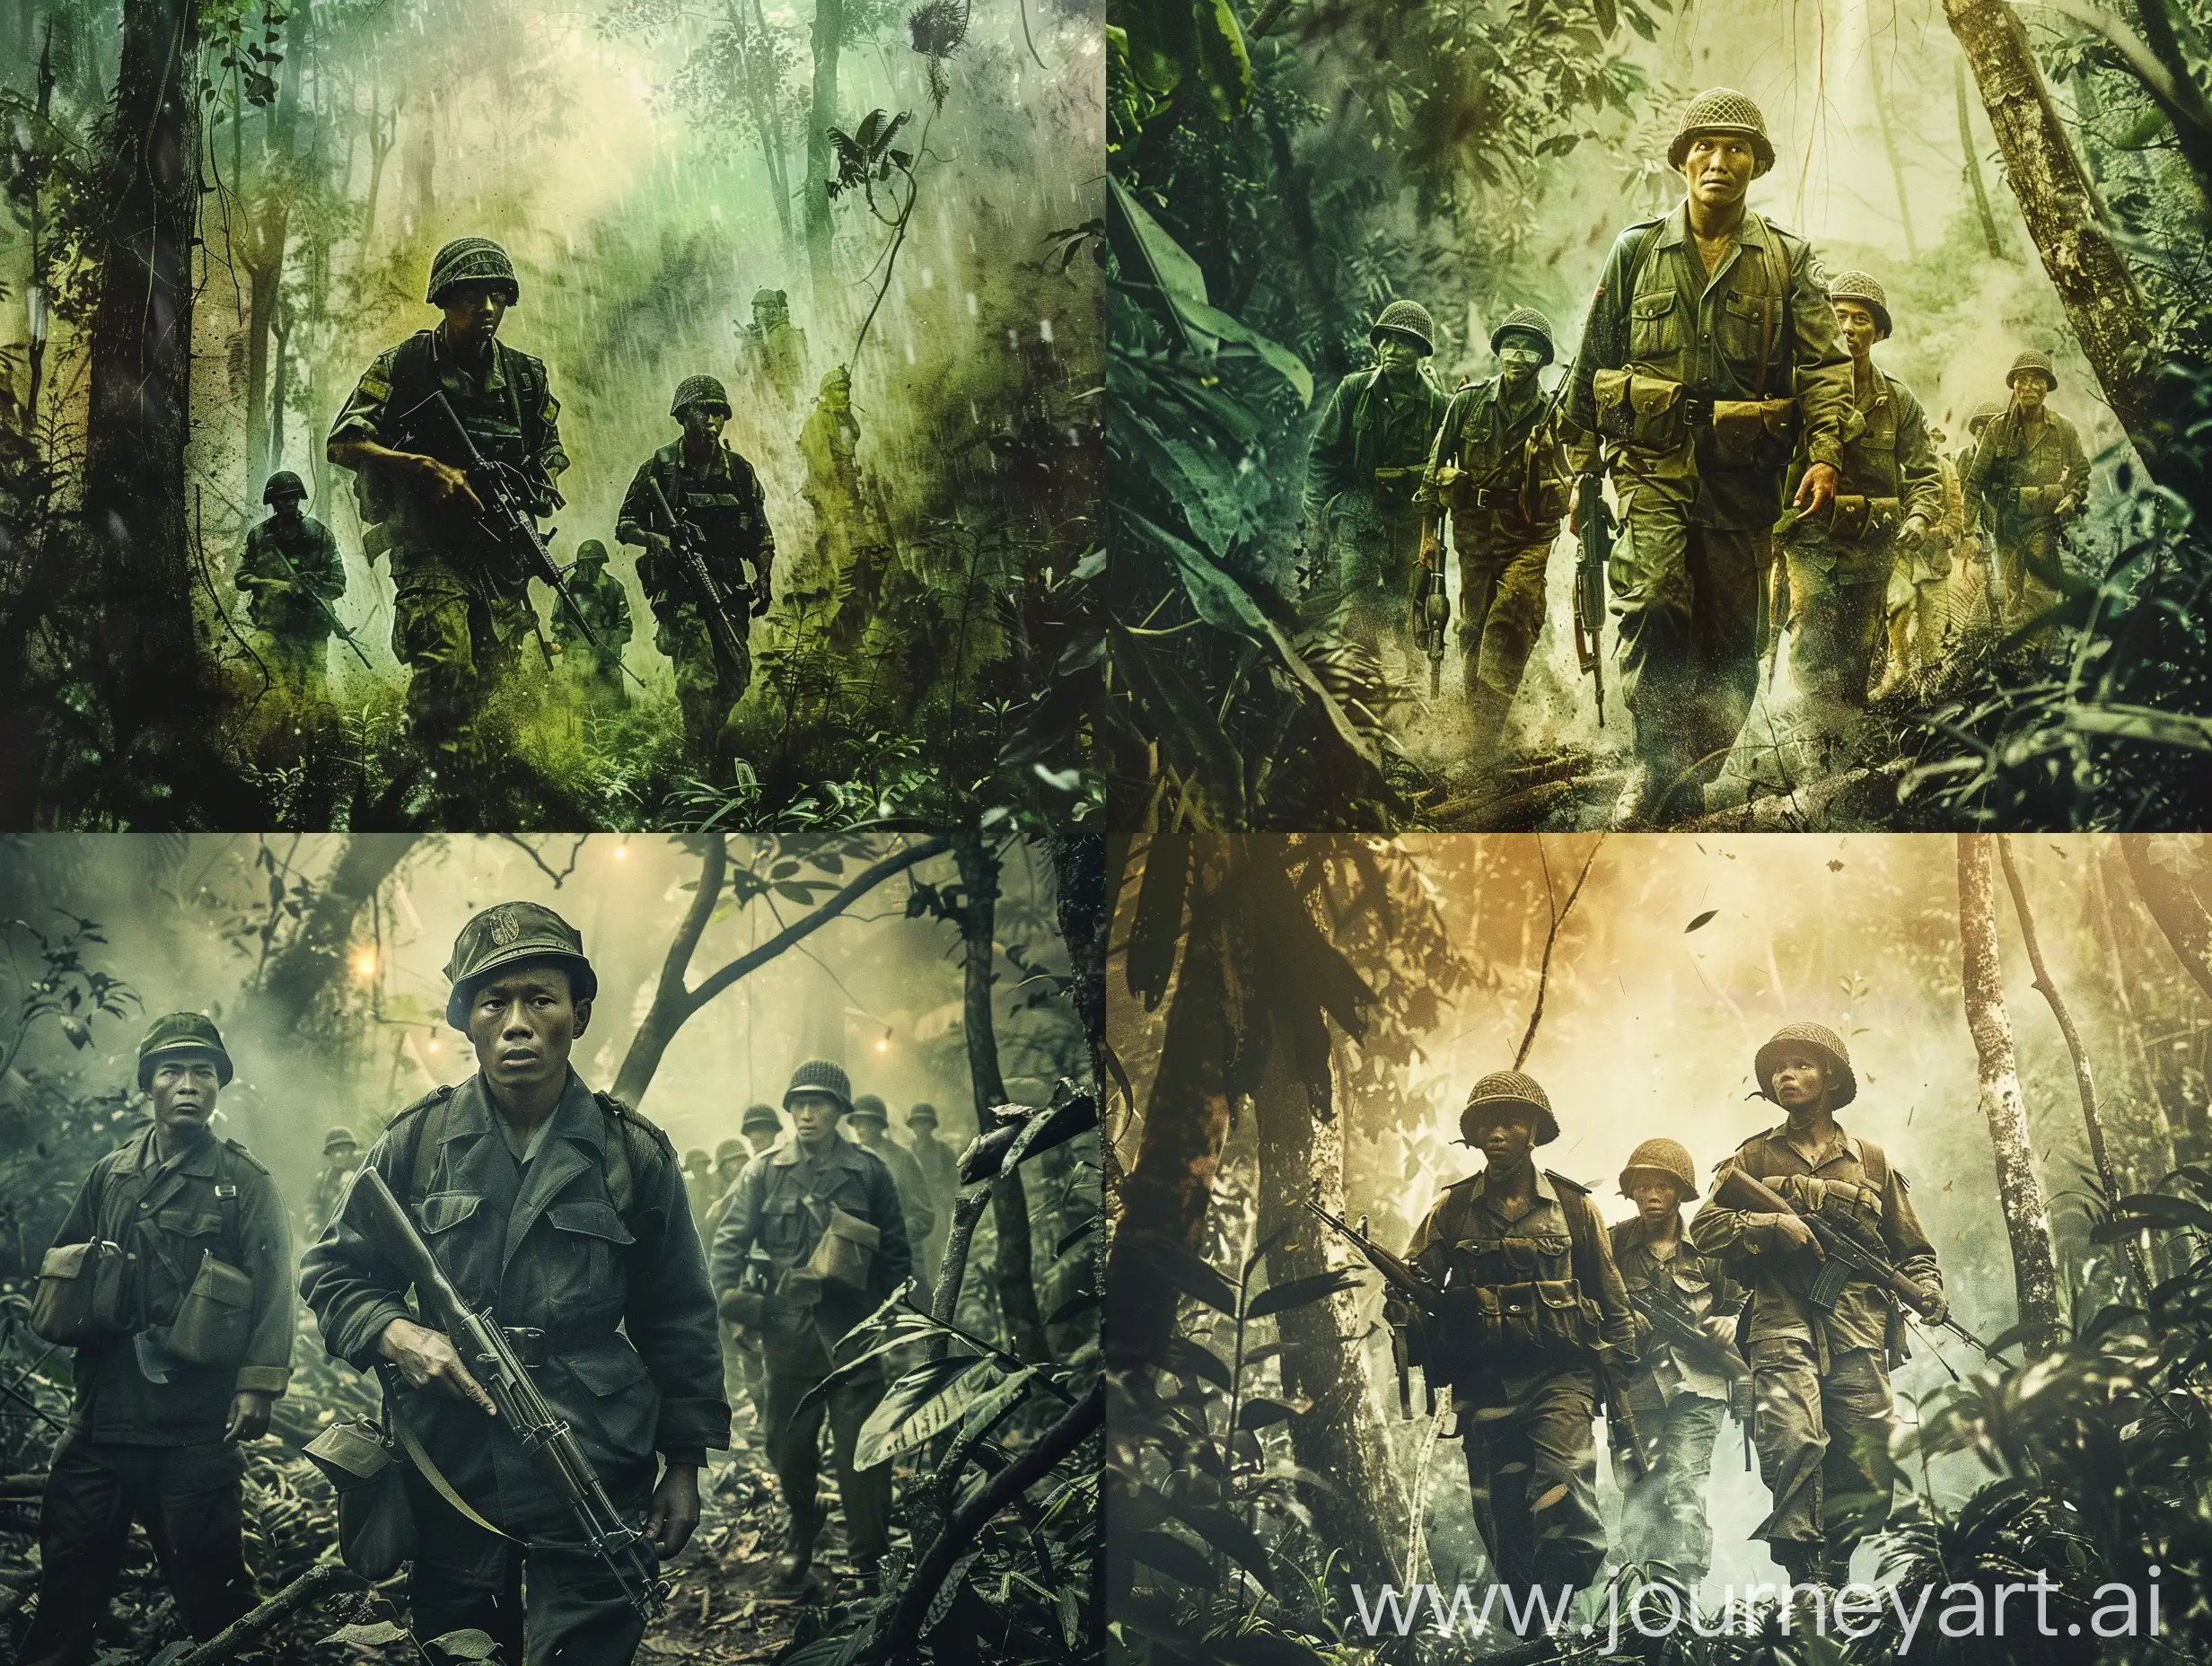 Indonesian-Soldiers-in-the-Forest-Movie-Poster